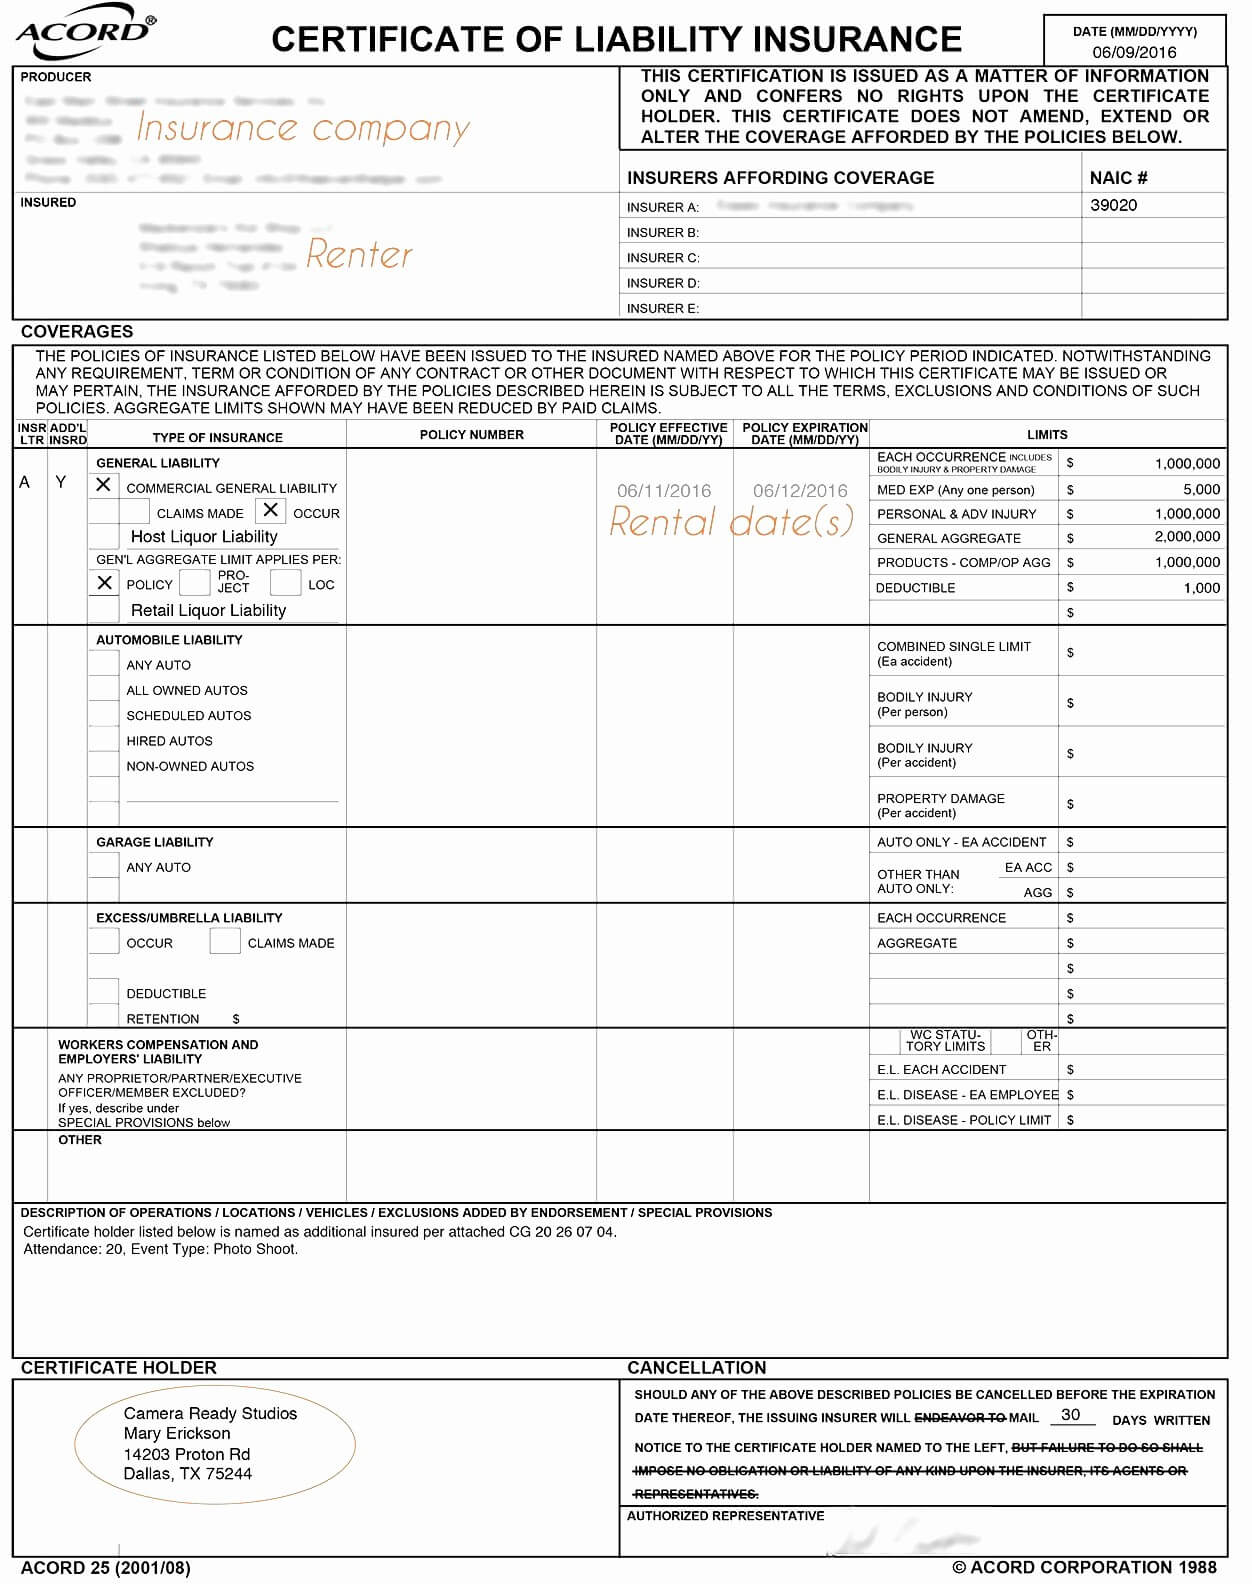 009 20Acord Form Fresh Certificate Liability Insurance Throughout Acord Insurance Certificate Template